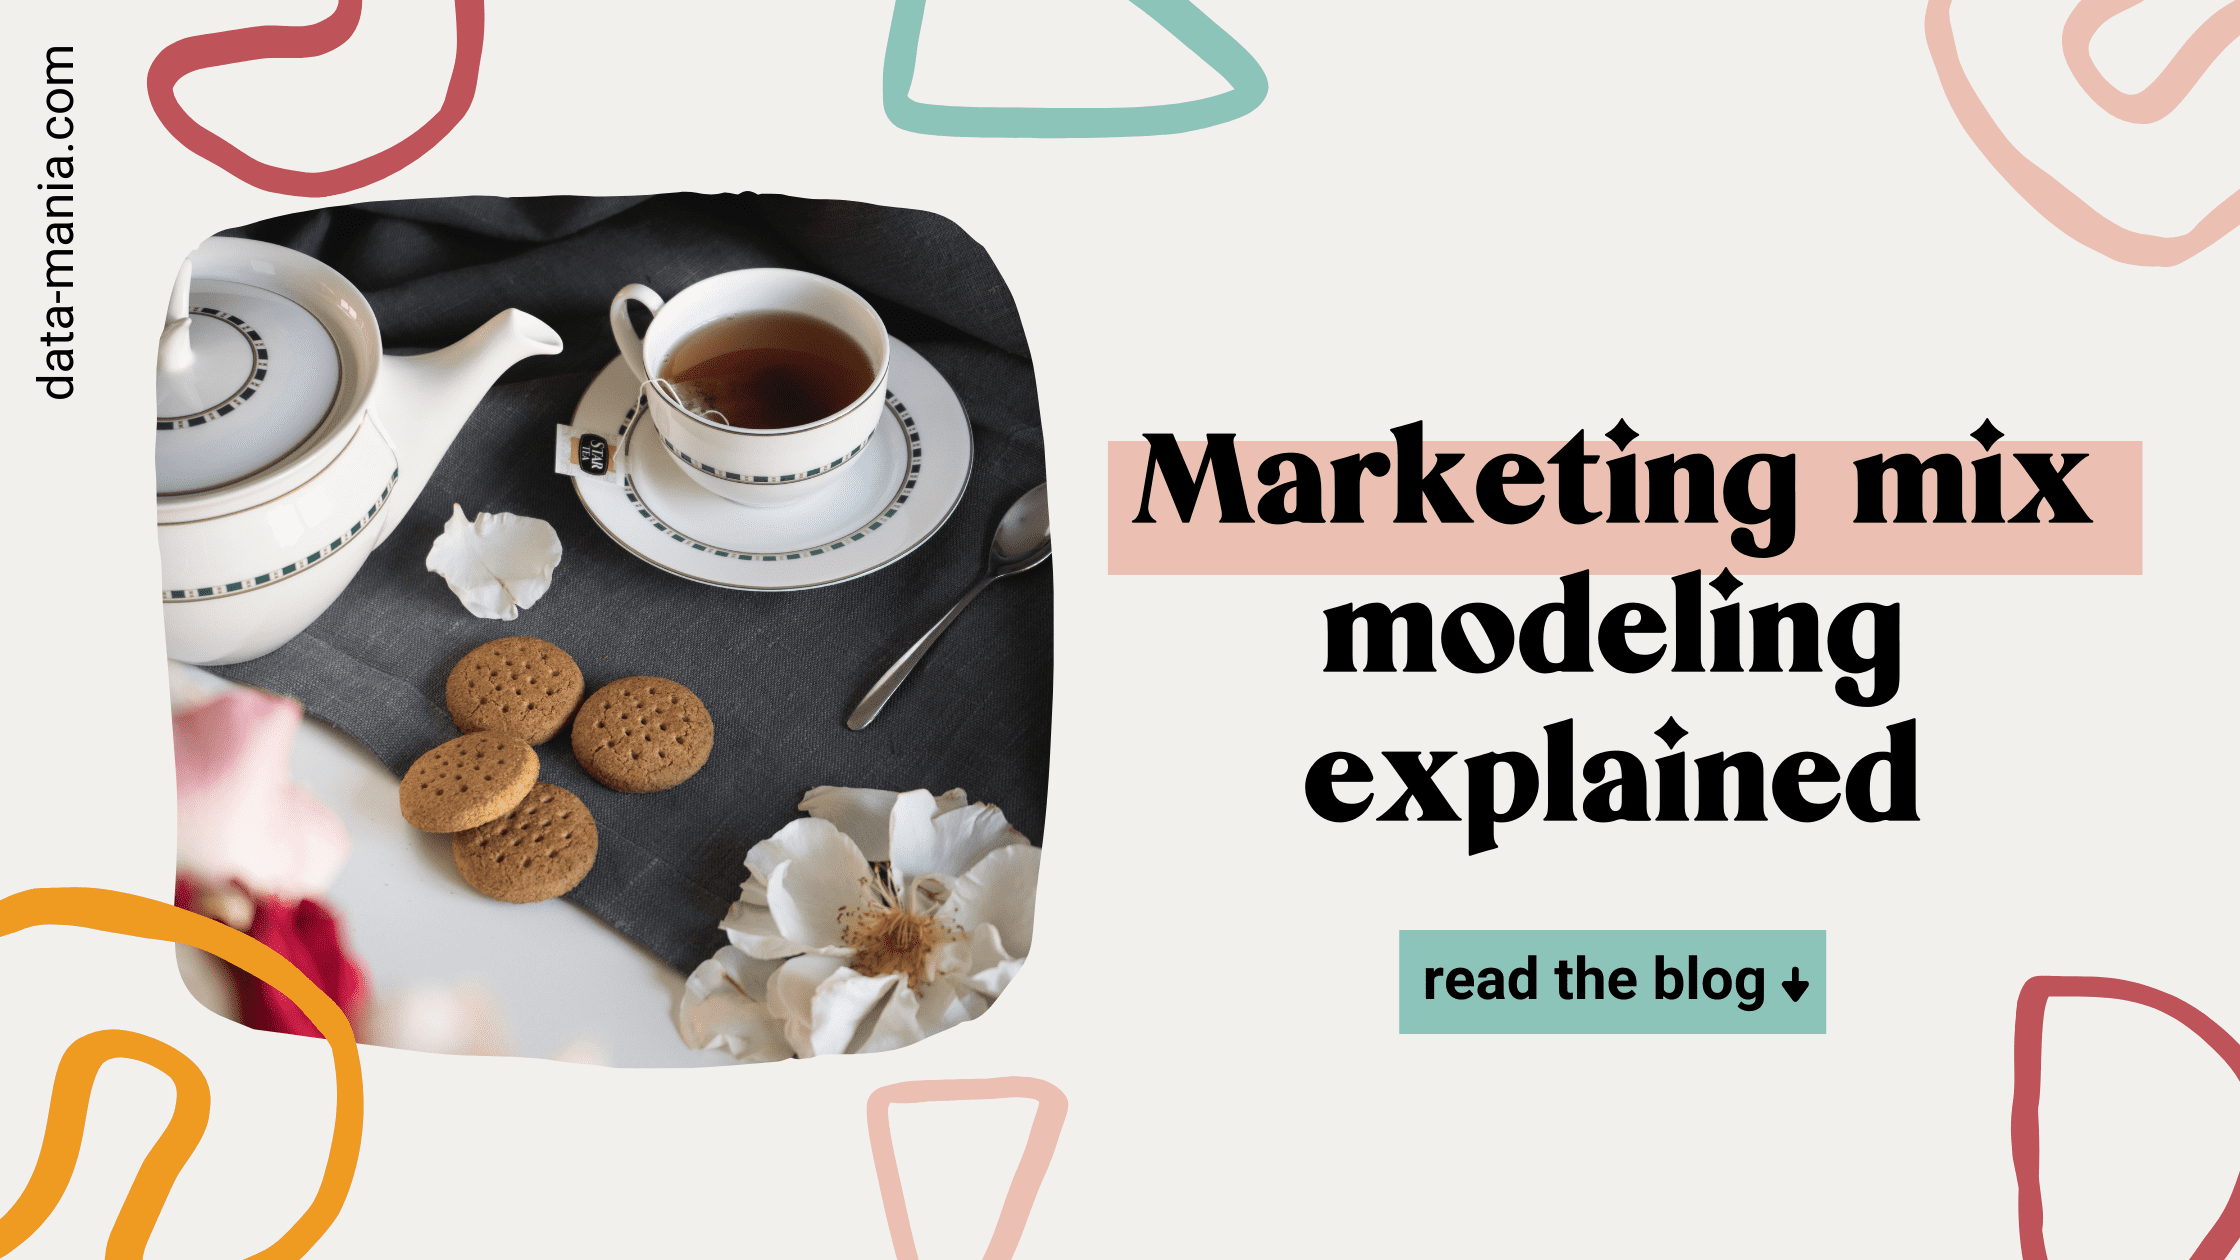 what is marketing mix modeling